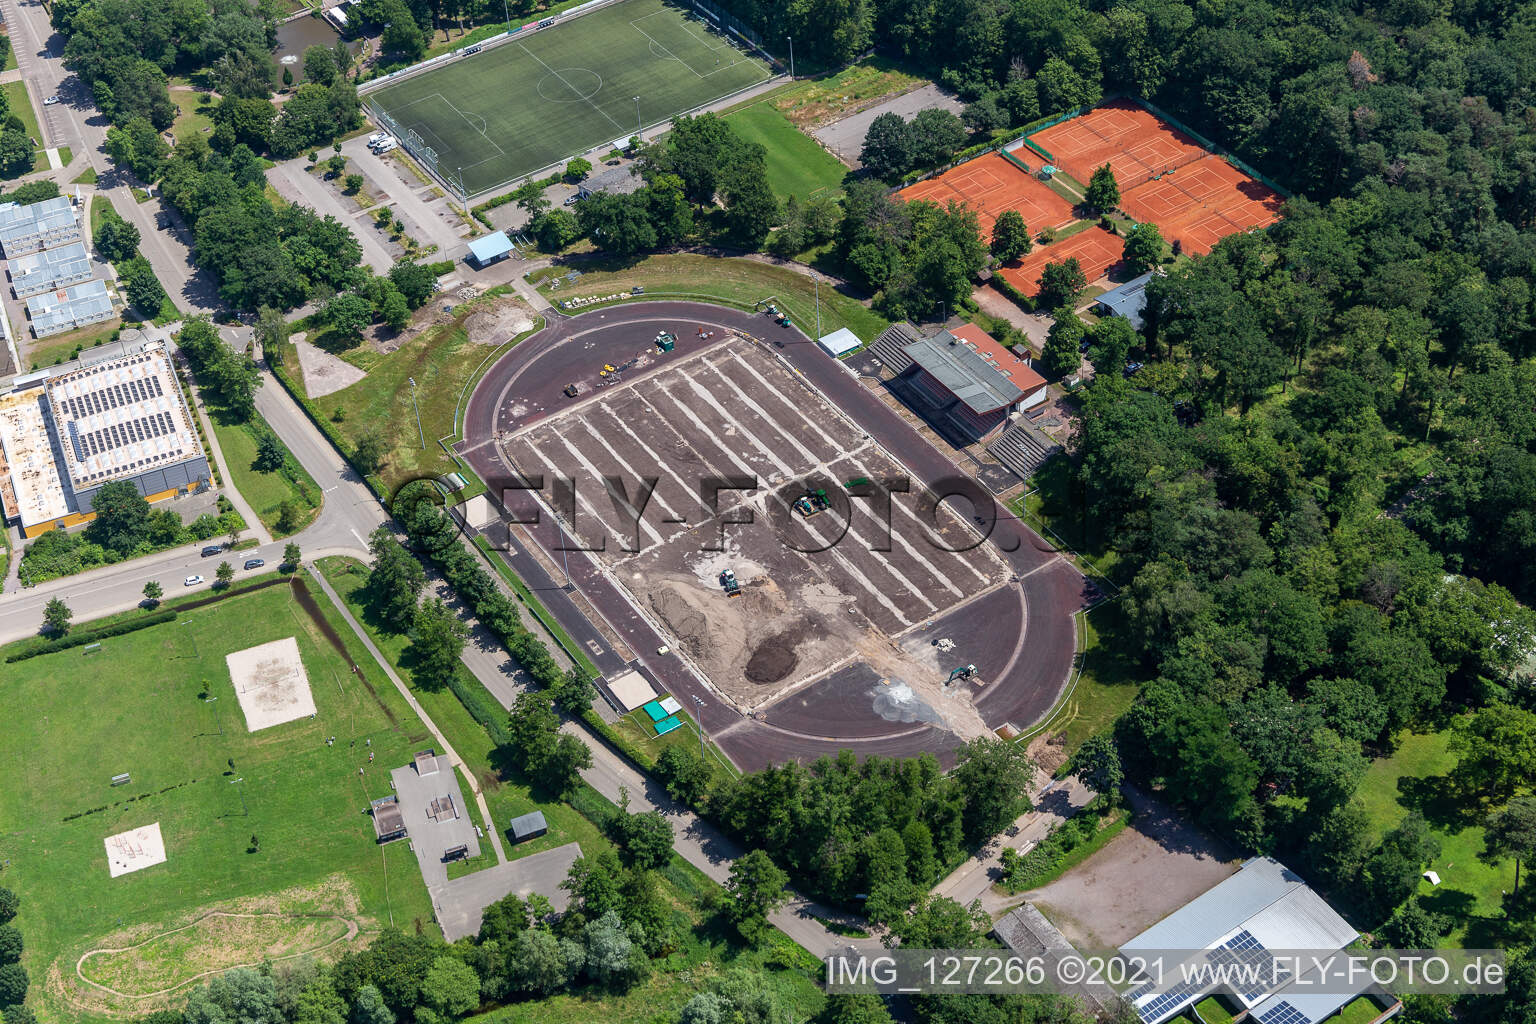 Aerial view of Bienwaldstadion, new pitch in Kandel in the state Rhineland-Palatinate, Germany